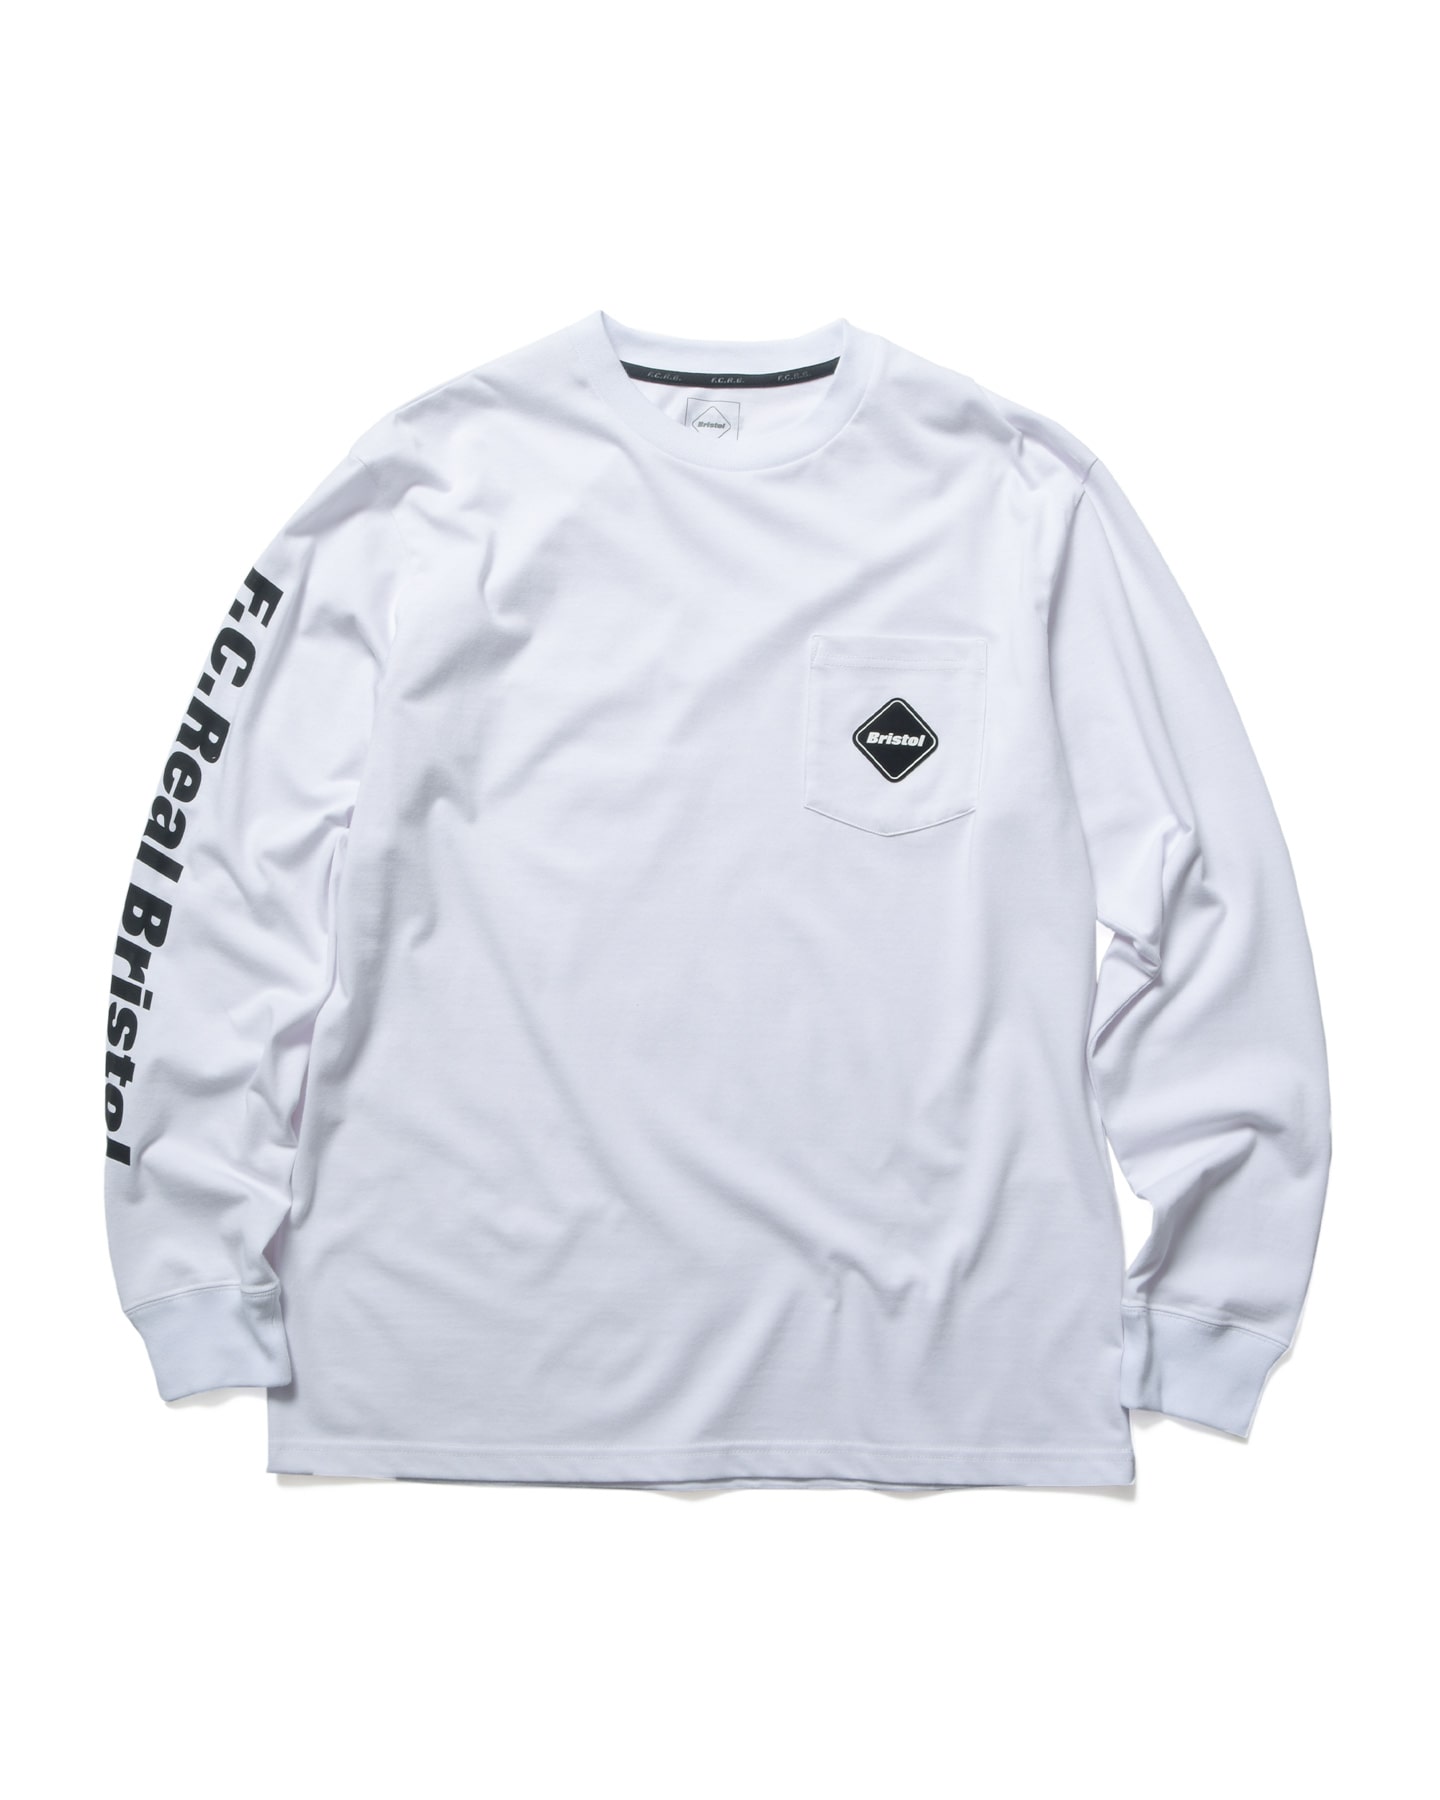 FCRB AUTHENTIC L/S TEAM POCKET TEE-